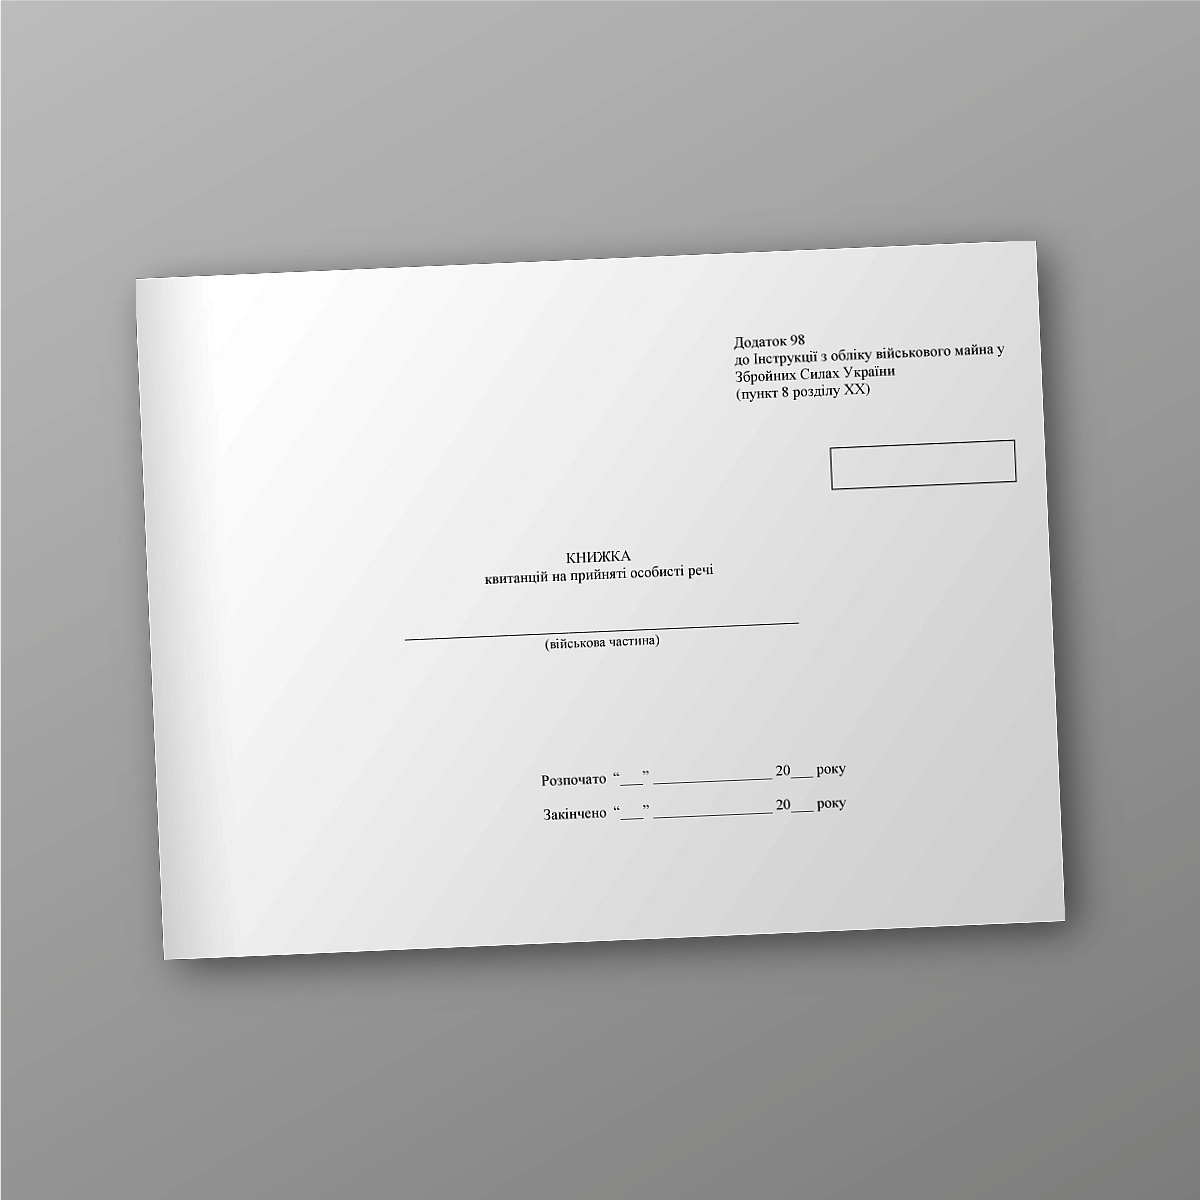 Book of receipts for accepted personal items | PrintTo: